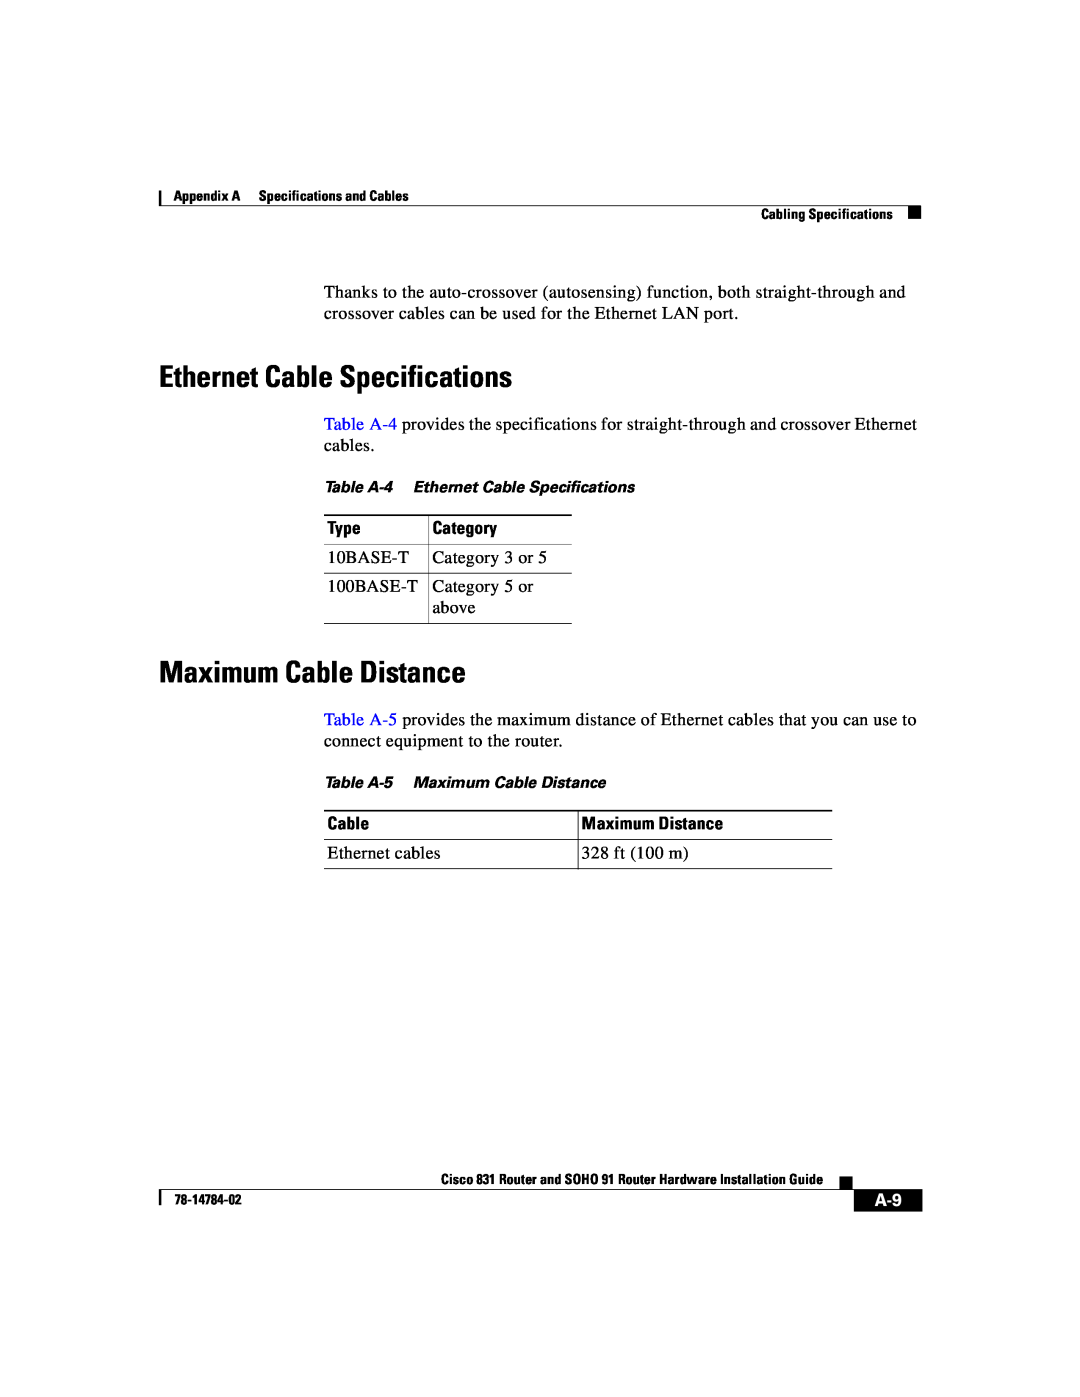 Cisco Systems 78-14784-02 manual Ethernet Cable Specifications, Maximum Cable Distance 